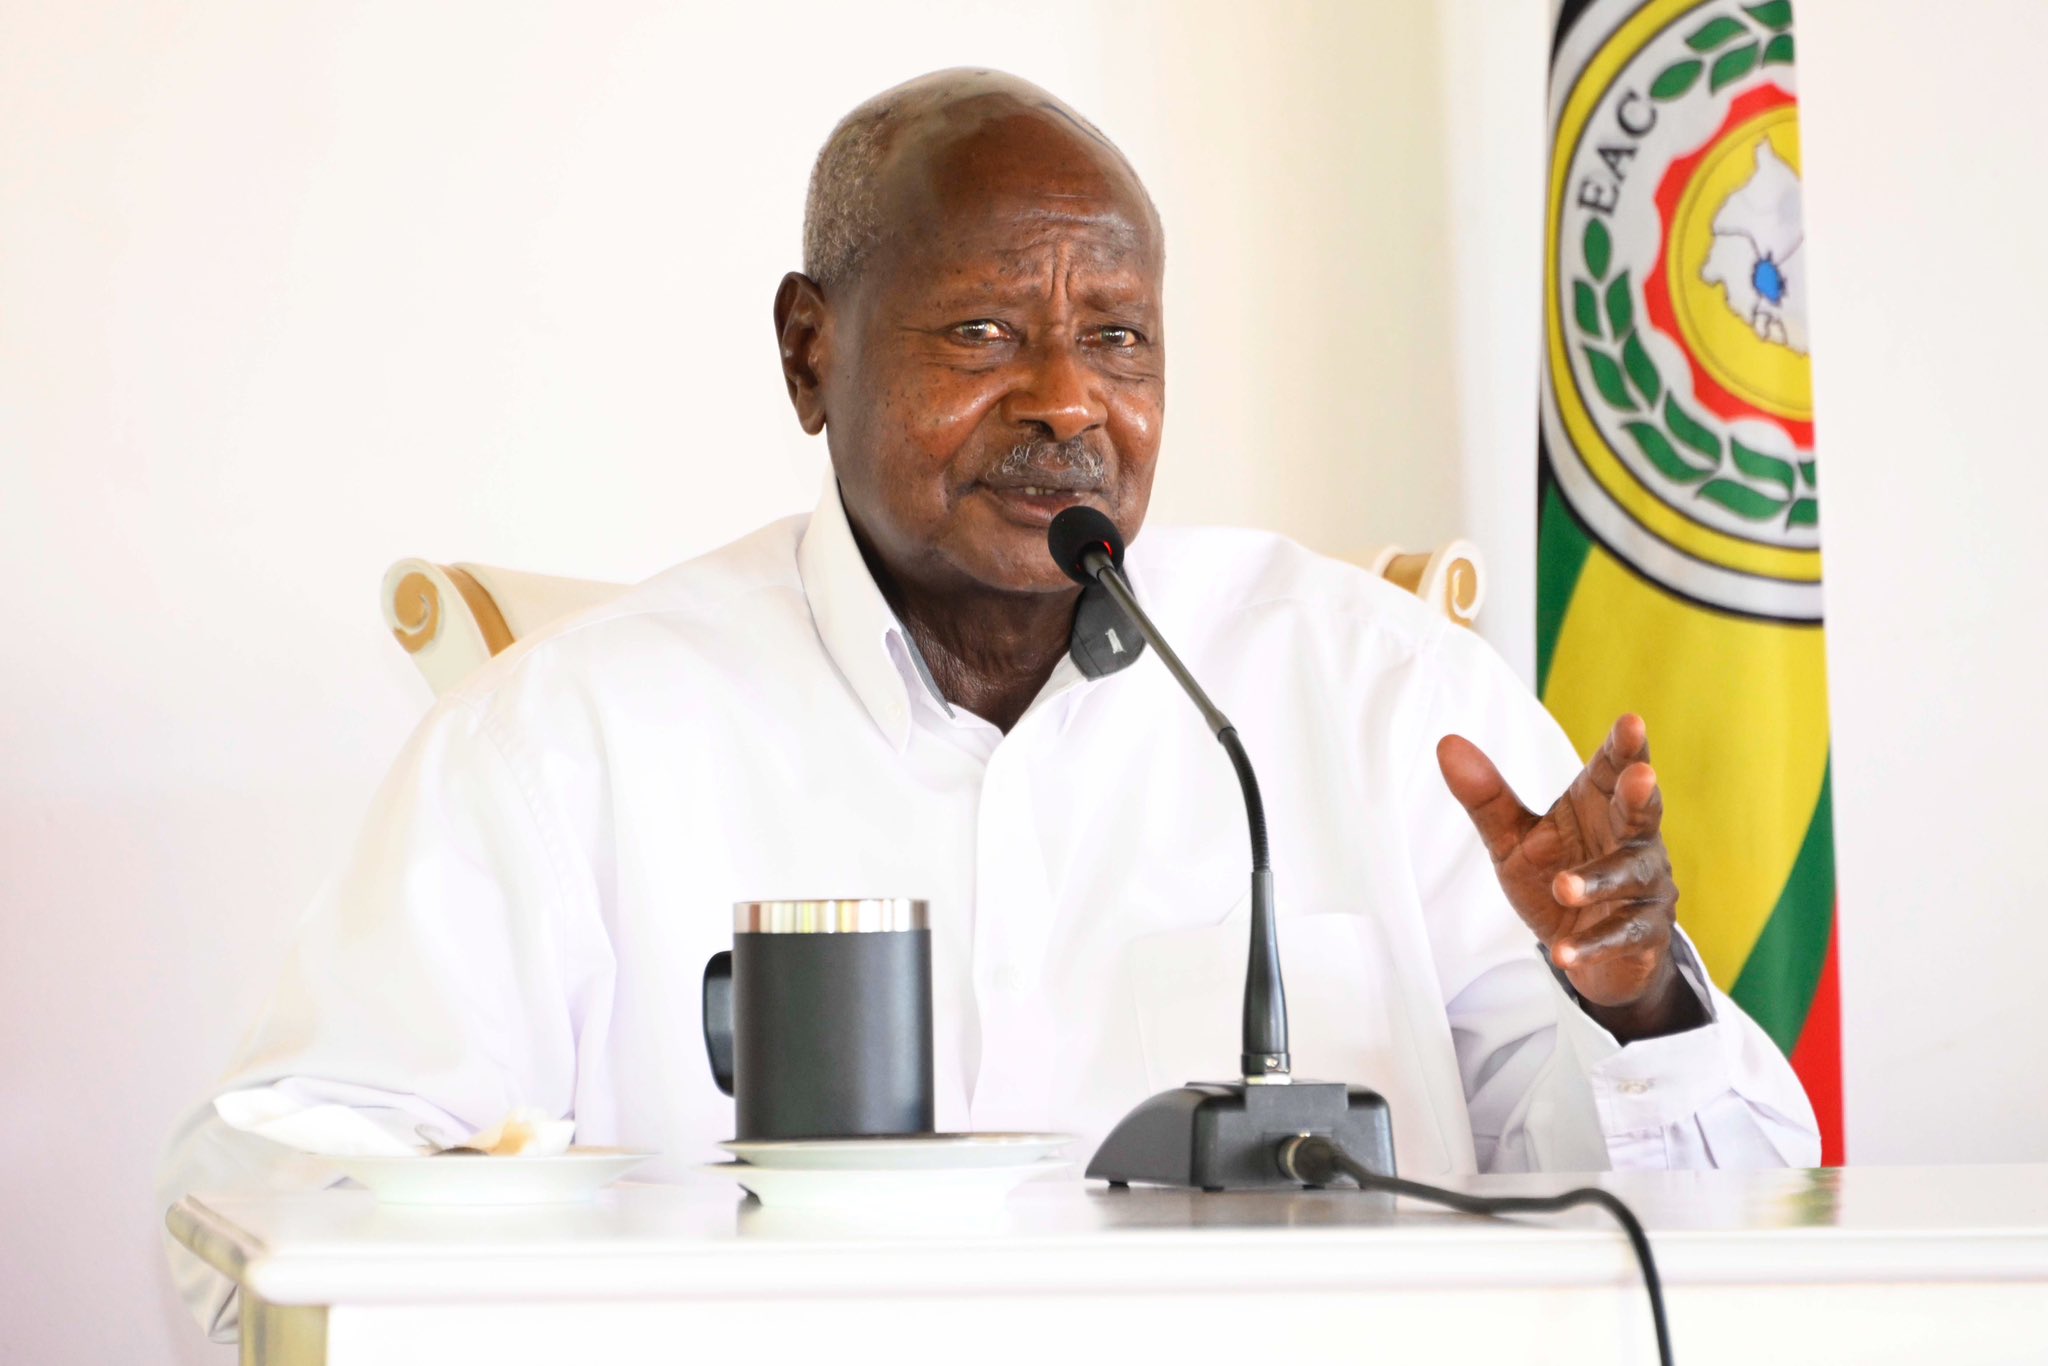 President Museveni, First Lady Enumerated In National Census Exercise